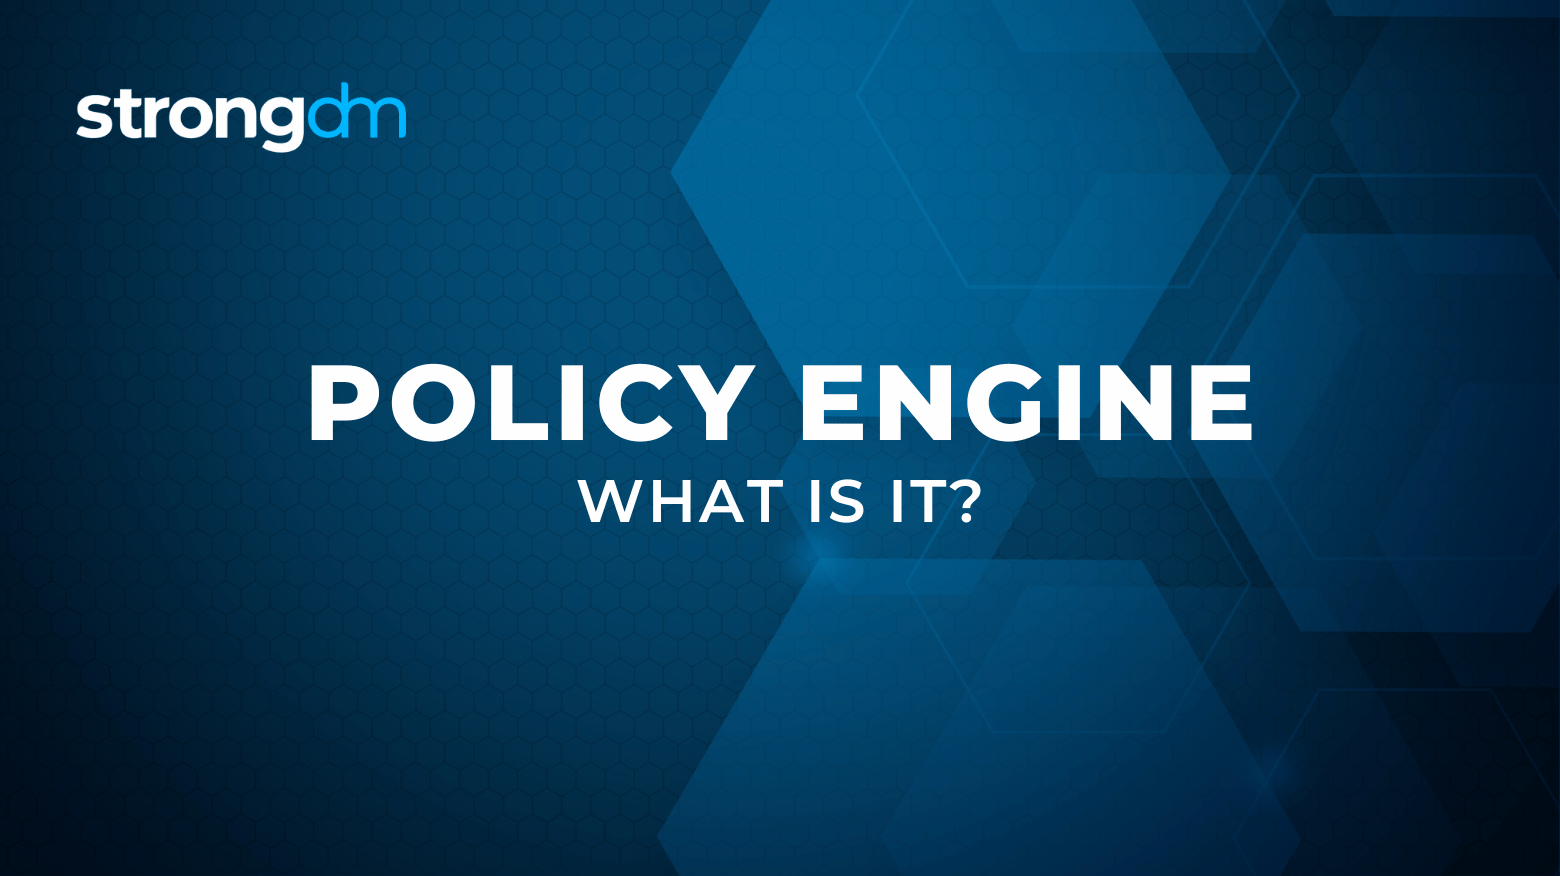 What Is a Policy Engine?